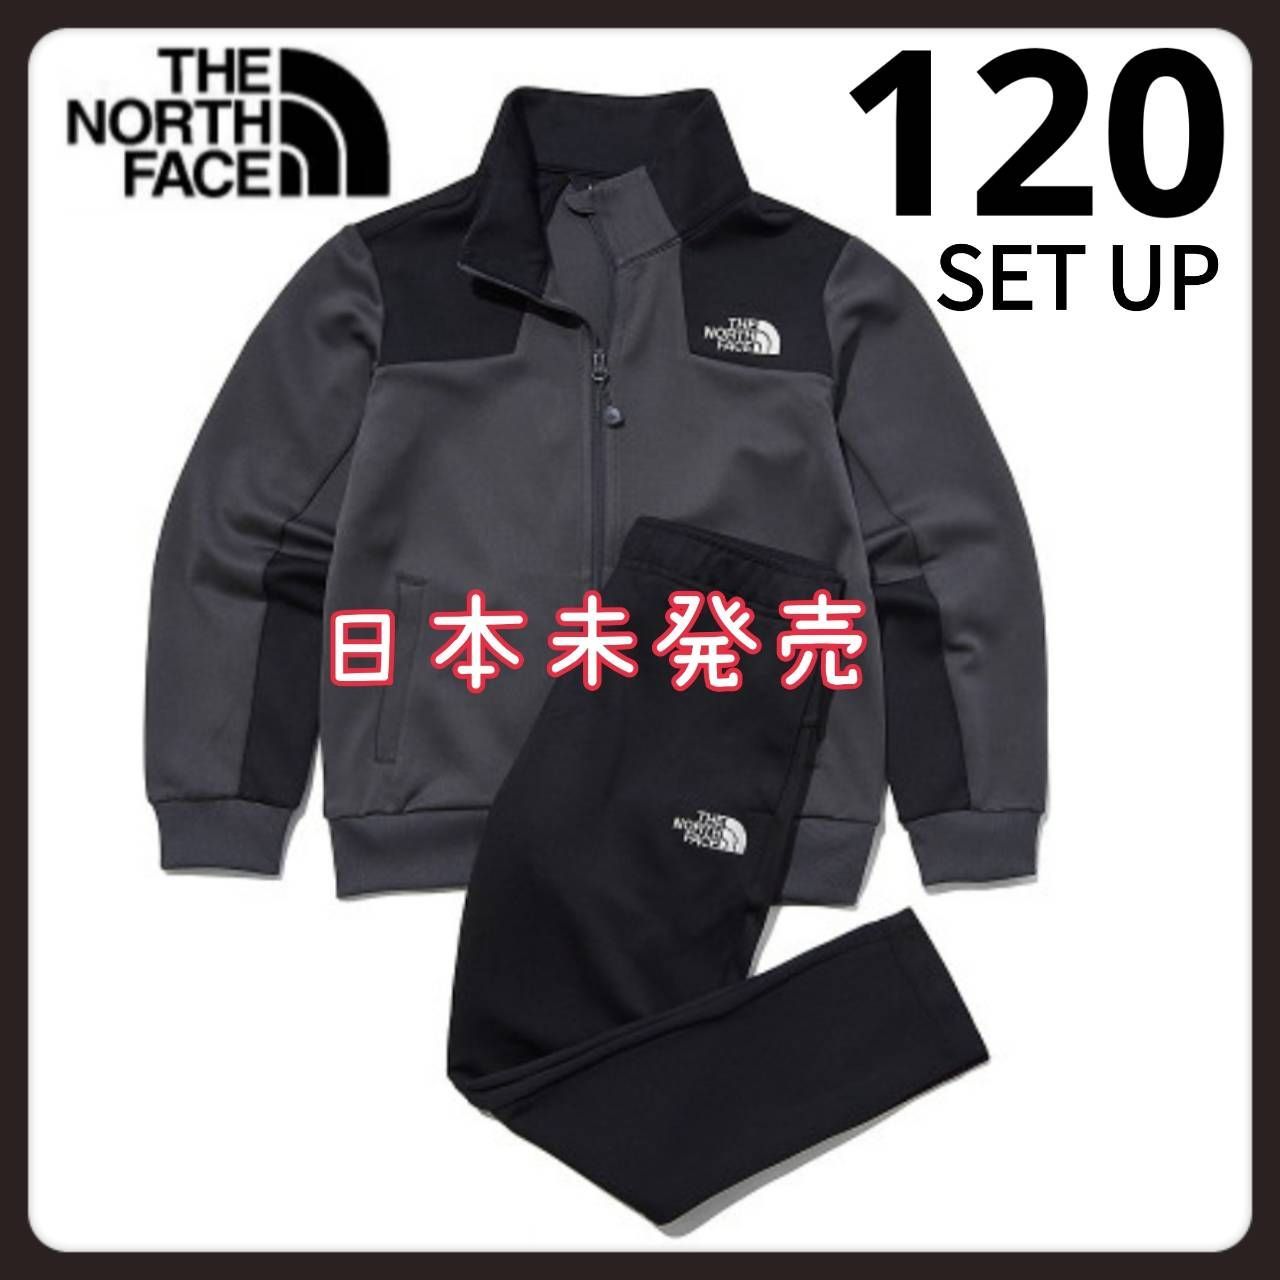 The North Face セットアップ-